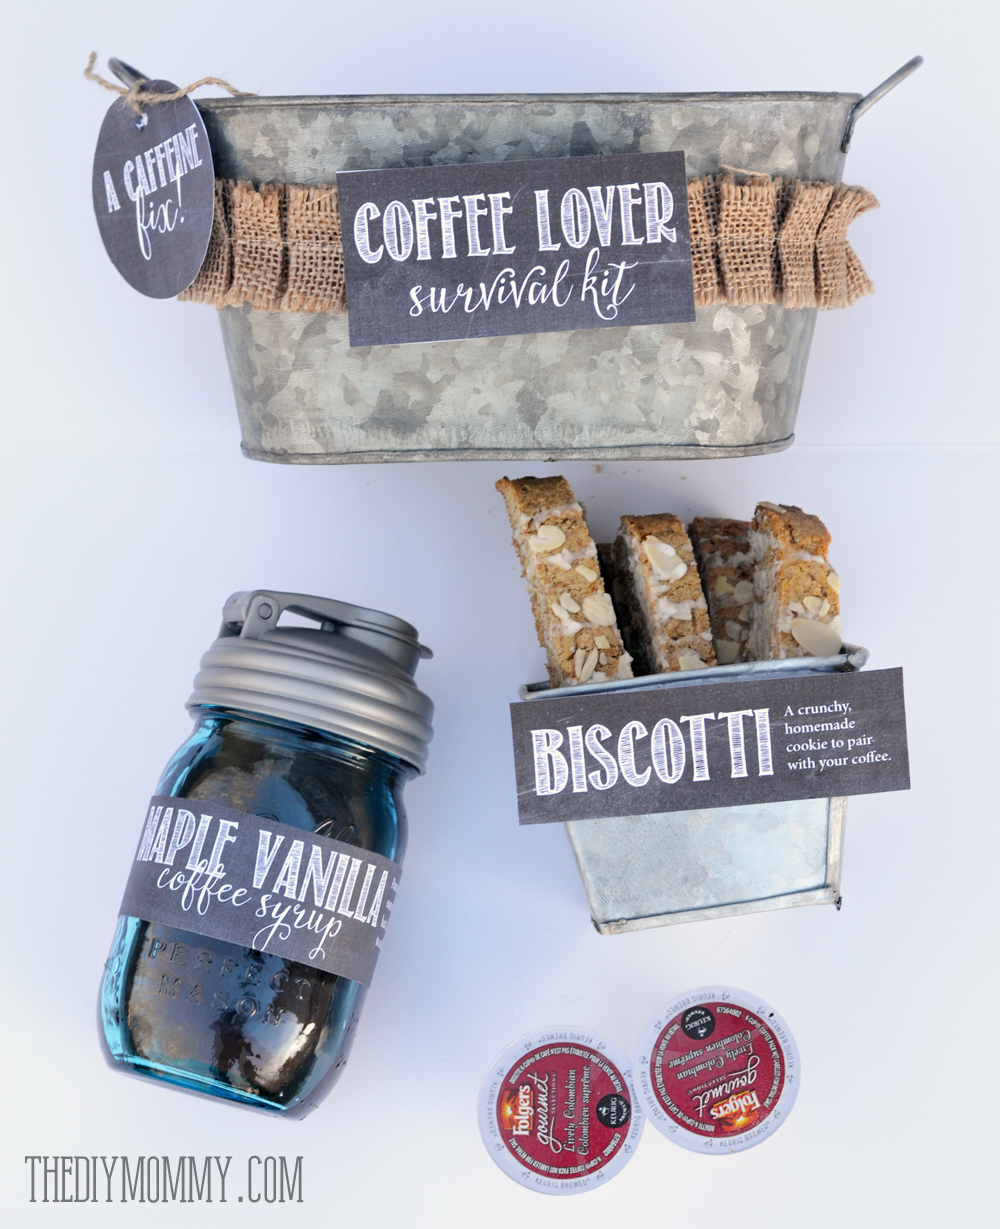 A gift basket idea: Coffee Lover Suvival Kit! Homemade coffee syrup, homemade bisocotti, some k-cups and free printables!